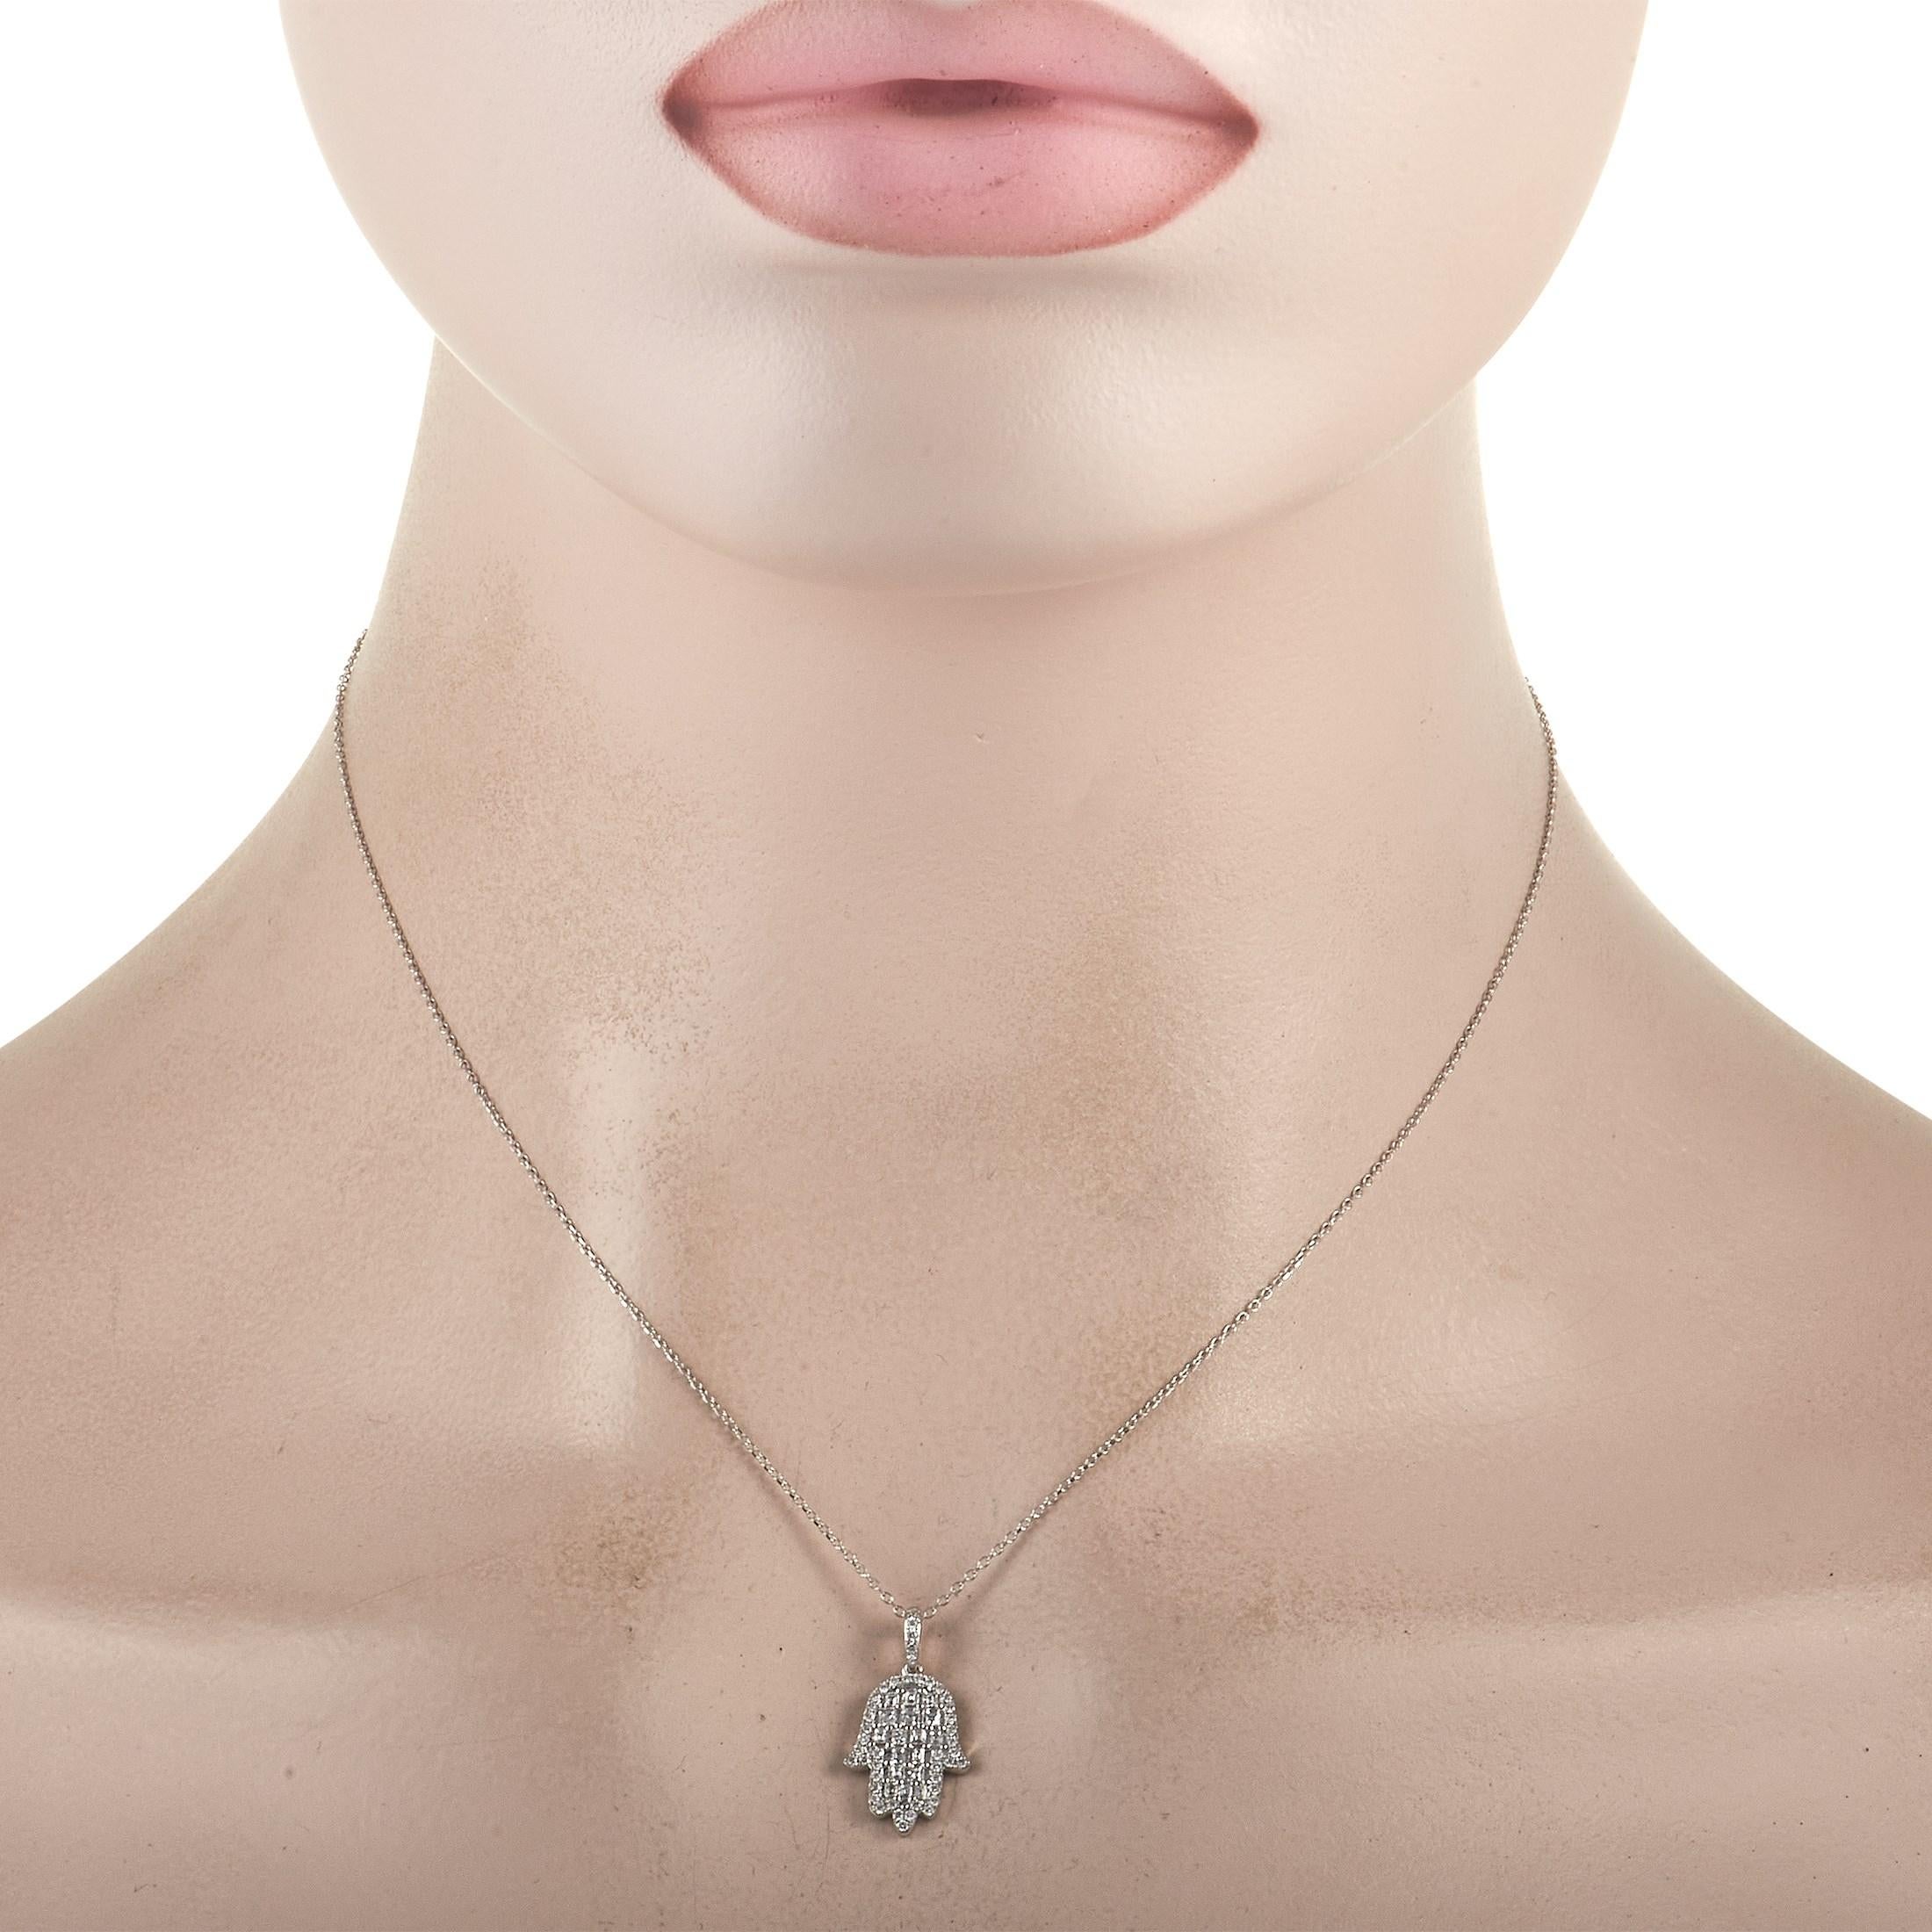 The Hamsa - a spiritual symbol of protection against evil spirits – shines to life on this exquisite necklace thanks to a shimmering 18K White Gold pendant measuring 0.75” long and 0.5” wide. A combination of Ascher cut diamonds totaling 0.38 carats